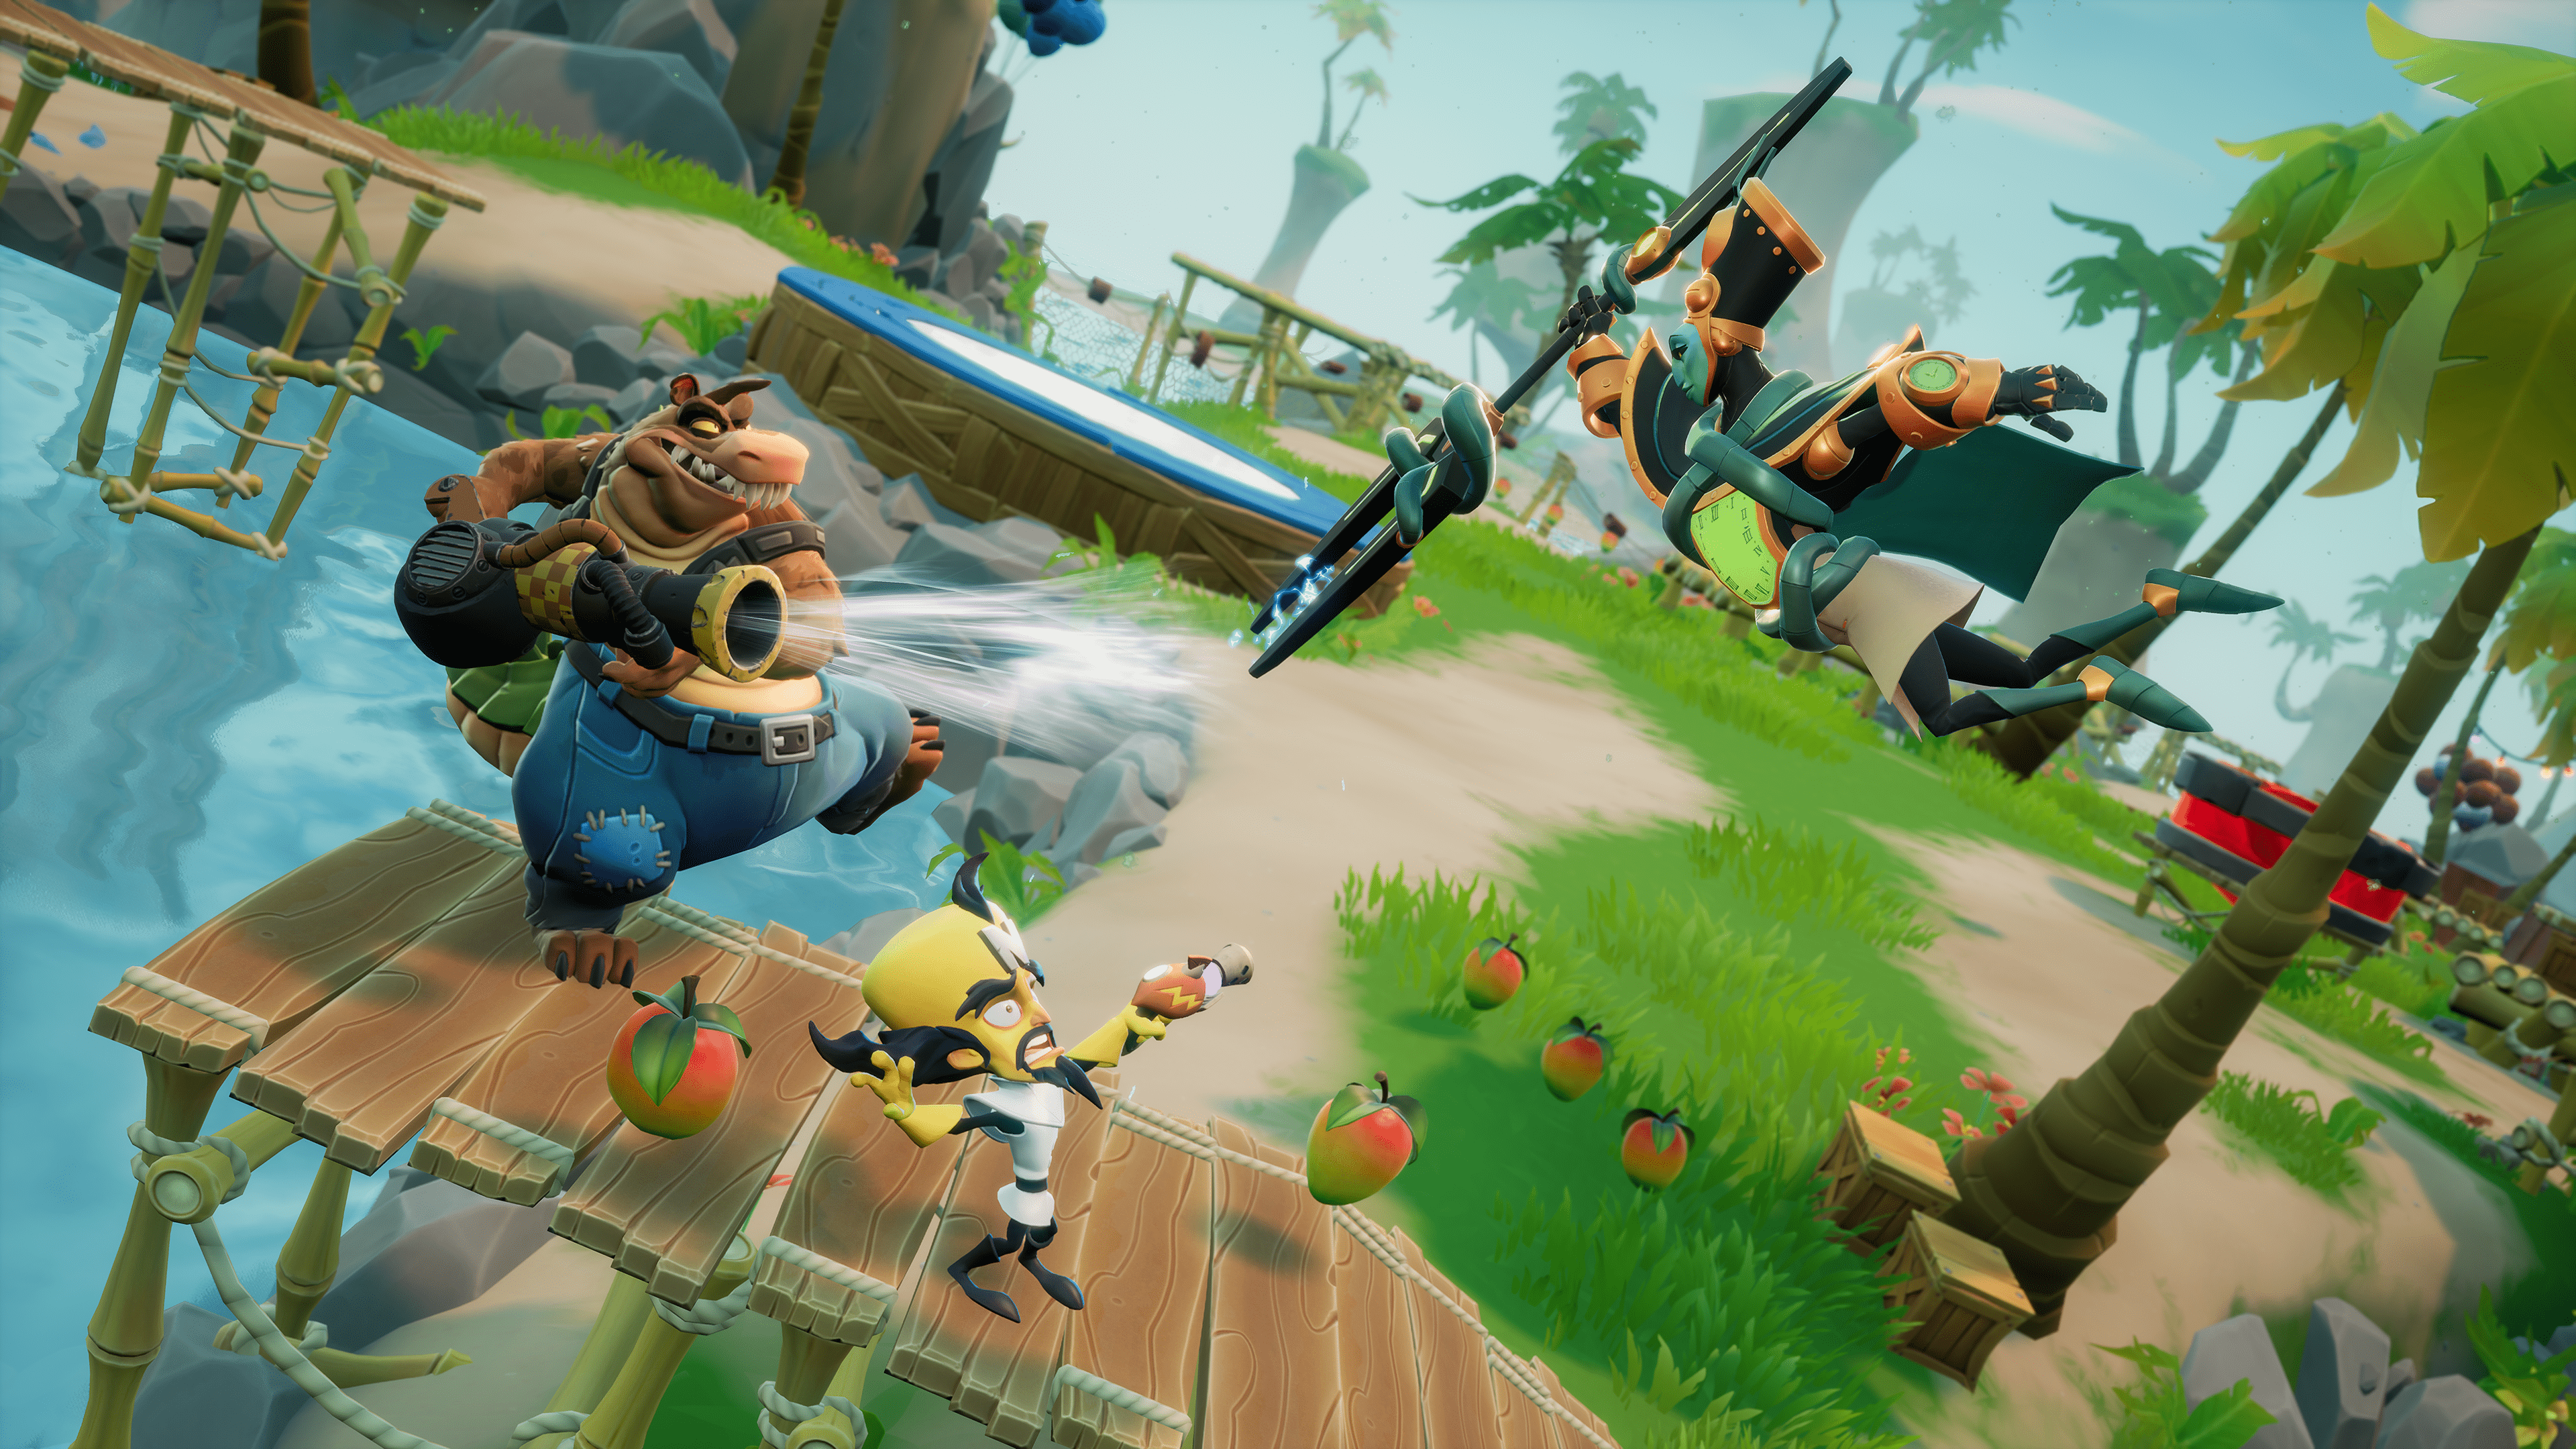 Crash Team Rumble — Pre-order now and get access to the Closed Beta April  20-24